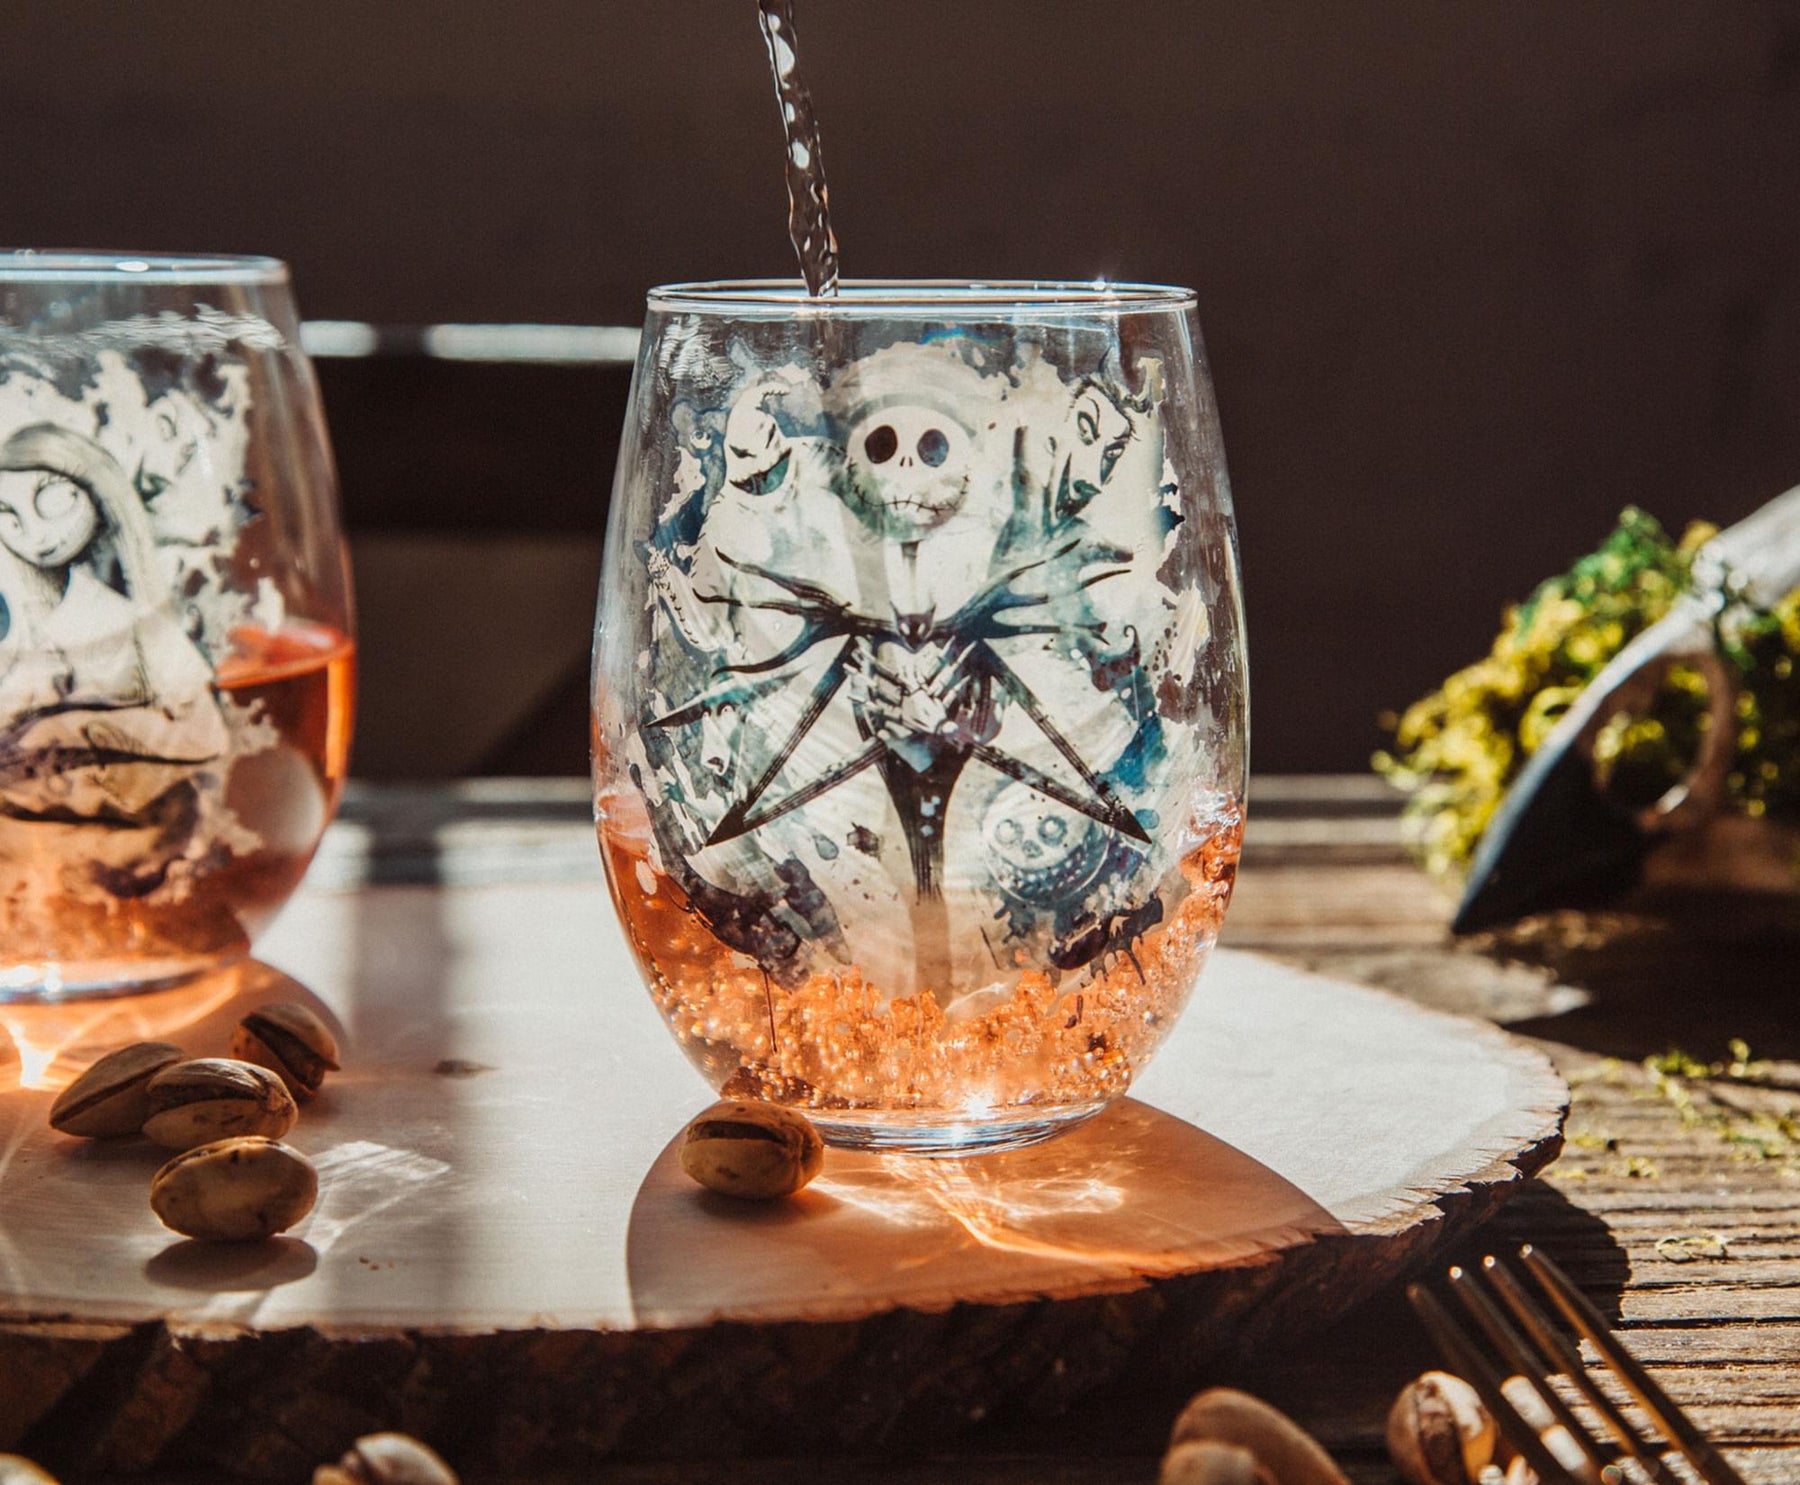 Officially Licensed Star Wars Wine Glasses for Christmas